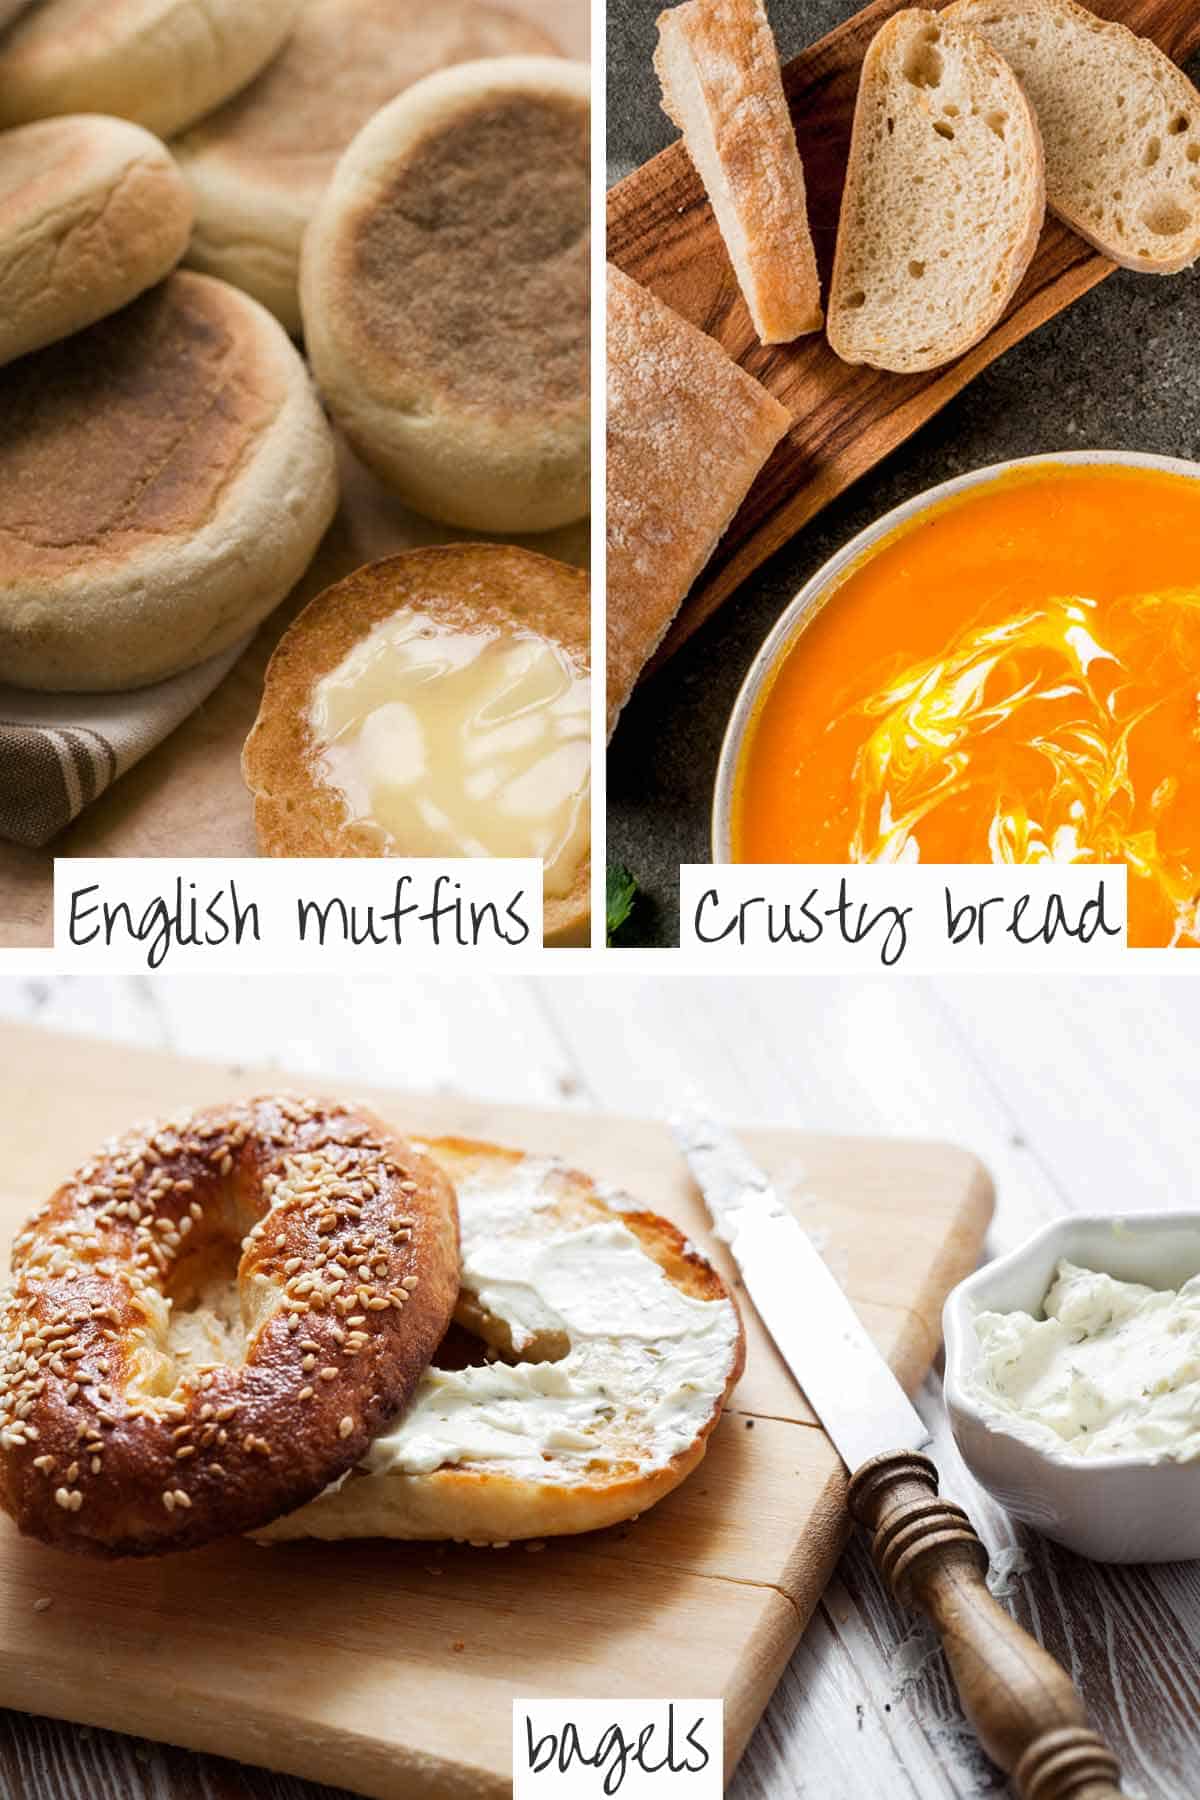 English muffins, crusty bread with pumpkin soup, and a sliced bagel with cream cheese.